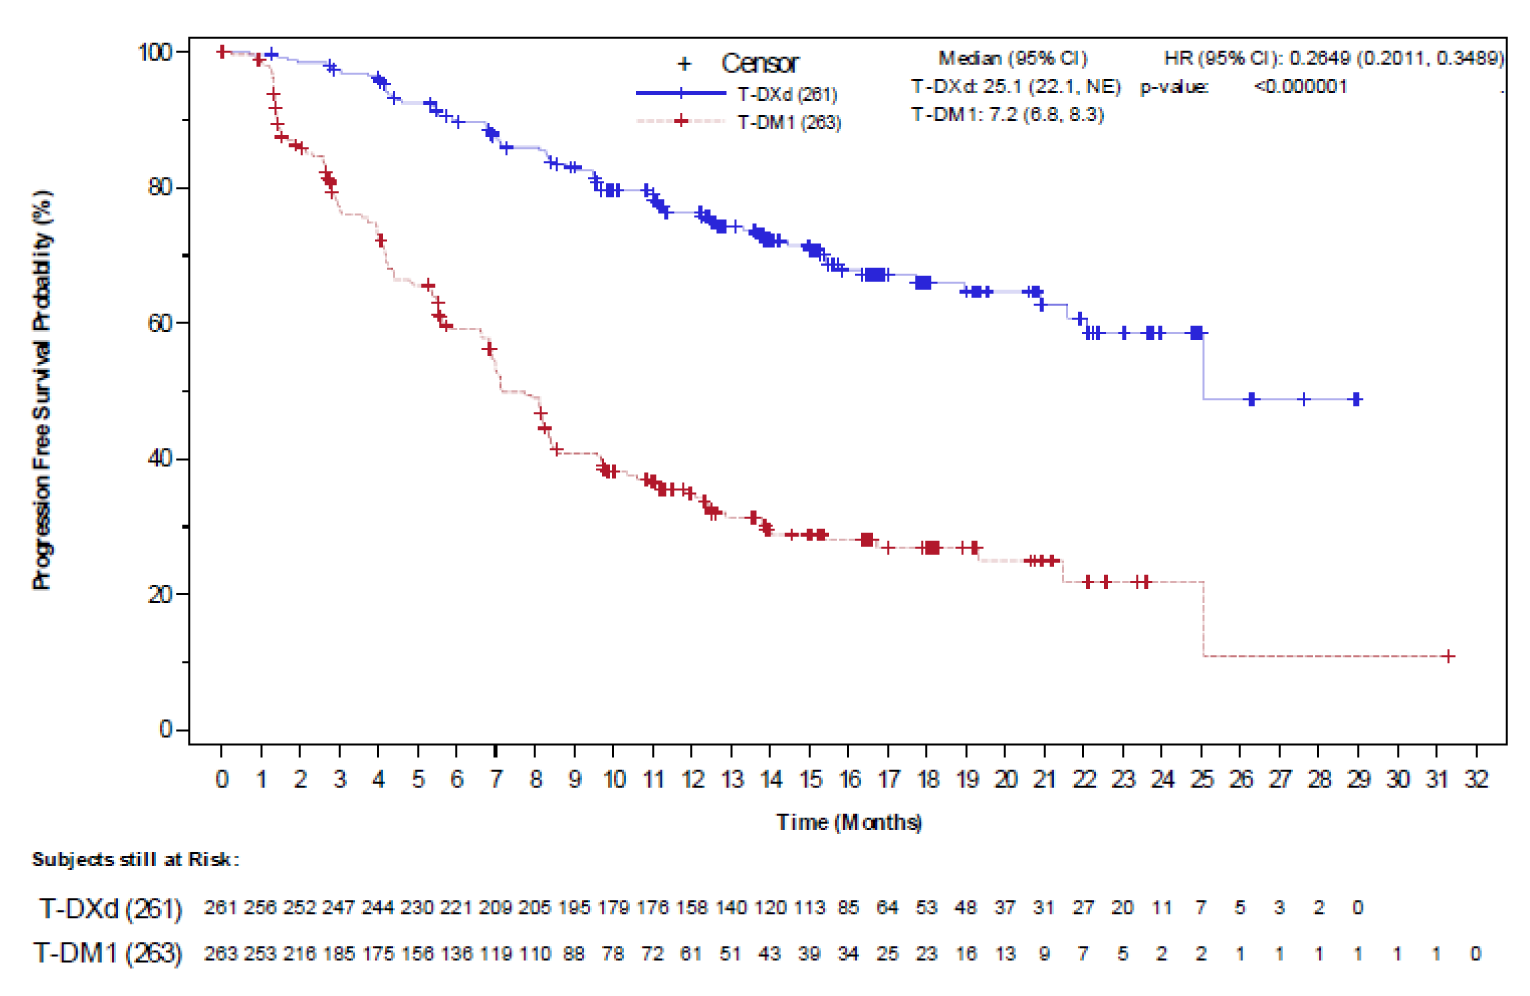 In this Kaplan-Meier analysis of PFS per IA among patients in the DESTINY-Breast03 study, approximately 40% of patients receiving trastuzumab emtansine had progressed or died by 6 months, approximately 65% had progressed or died by 12 months, and approximately 80% had progressed or died by 24 months. In contrast, approximately 10% of patients receiving T-DXd had progressed or died by 6 months, approximately 25% had progressed or died by 12 months, and approximately 40% had progressed or died by 24 months. Median PFS was 25.1 months (95% CI, 22.1 months to not estimable) in the T-DXd arm and 7.2 months (95% CI, 6.8 to 8.3 months) in the trastuzumab emtansine arm; the HR (95% CI) comparing T-DXd to trastuzumab emtansine was 0.2649 (0.2011, 0.3489) (P < 0.0001). The number of at-risk patients receiving T-DXd at 0, 1, 2, 3, 4, 5, 6, 7, 8, 9, 10, 11, 12, 13, 14, 15, 16, 17, 18, 19, 20, 21, 22, 23, 24, 25, 26, 27, 28, 29 30, 31, and 32 months was 261, 256, 252, 247, 244, 230, 221, 209, 205, 195, 179, 176, 158, 140, 120, 113, 85, 64, 53, 48, 37, 31, 27, 20, 11, 7, 5, 3, 2, and 0, respectively. The number of at-risk patients receiving trastuzumab emtansine at 0, 1, 2, 3, 4, 5, 6, 7, 8, 9, 10, 11, 12, 13, 14, 15, 16, 17, 18, 19, 20, 21, 22, 23, 24, 25, 26, 27, 28, 29 30, 31, and 32 months was 263, 253, 216, 185, 175, 156, 136, 119, 110, 88, 78, 72, 61, 51, 43, 39, 34, 25, 23, 16, 13, 9, 7, 5, 2, 2, 1, 1, 1, 1, 1, 1, and 0, respectively.